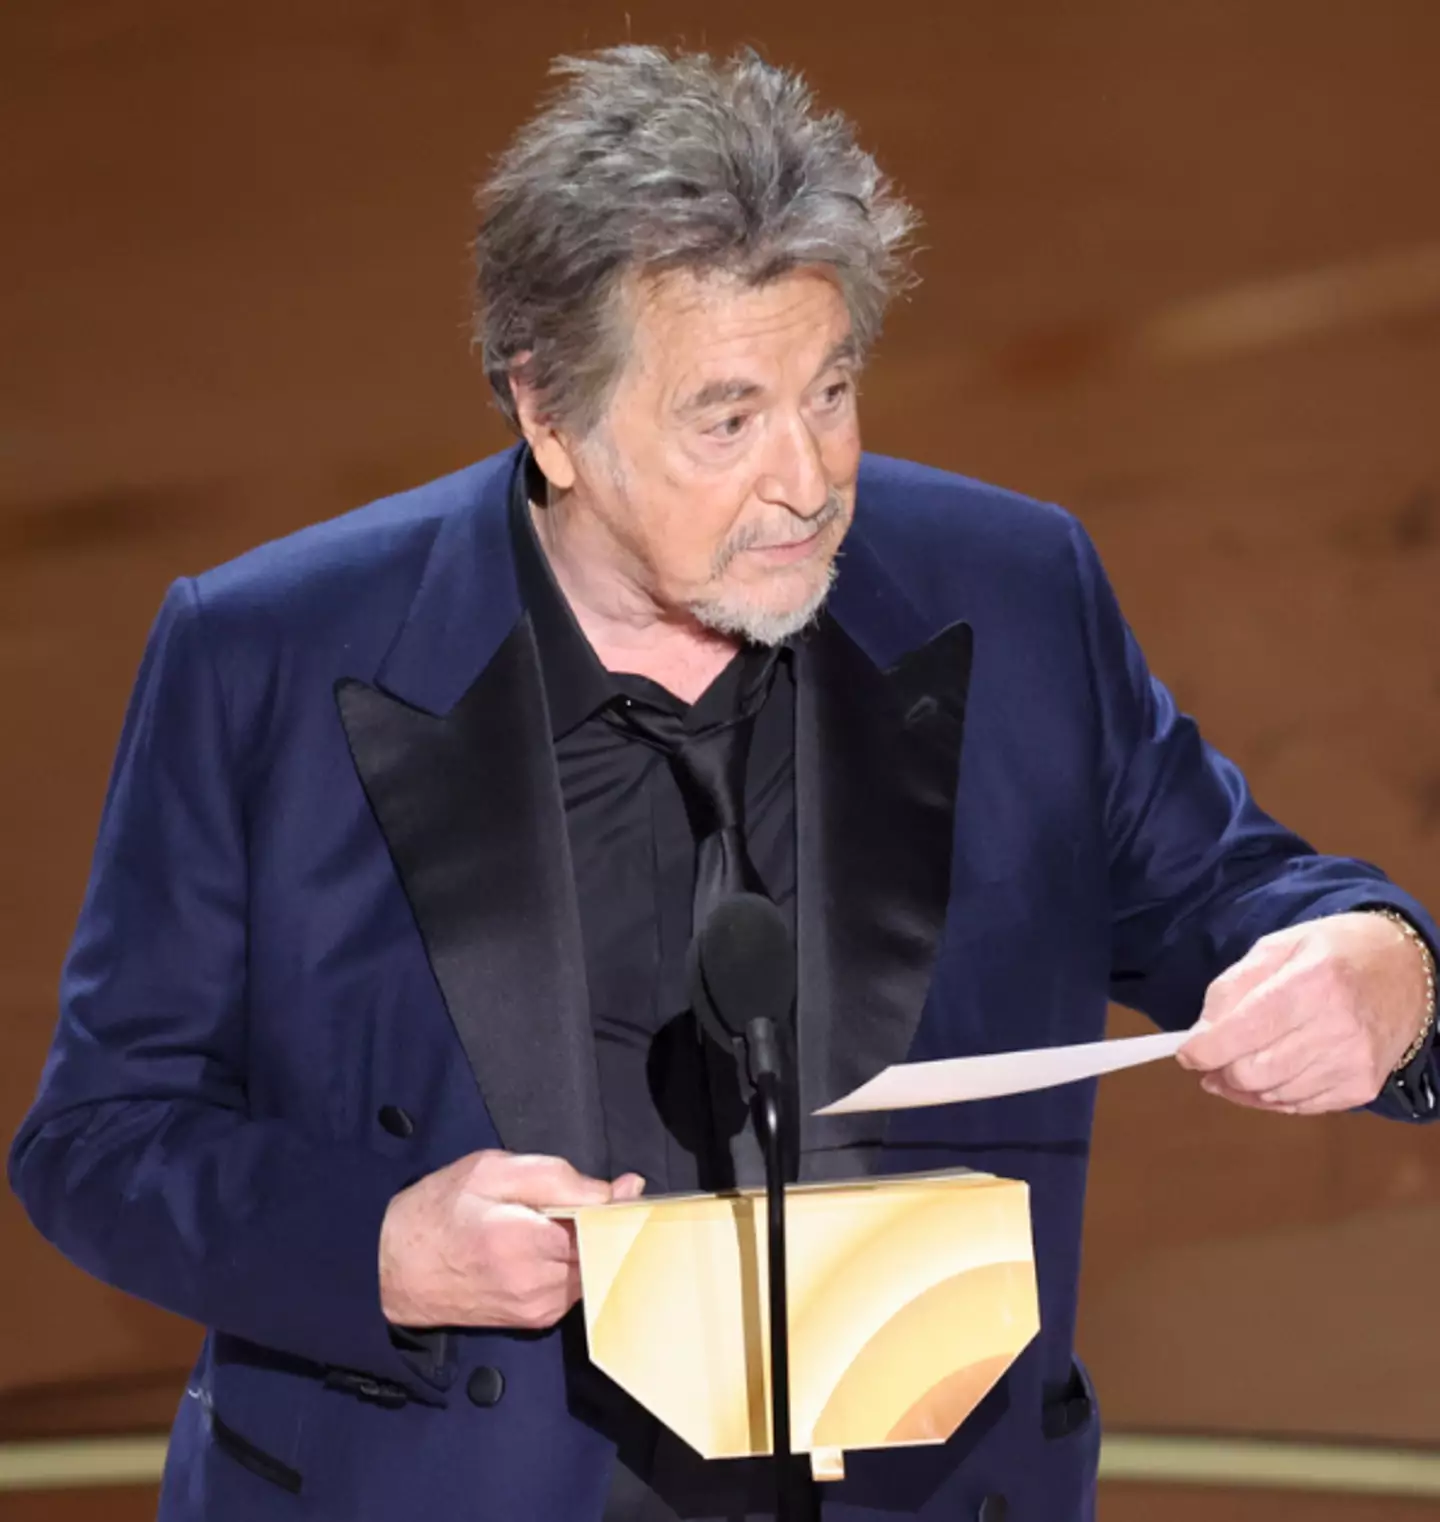 Al Pacino made the announcement for Best Picture.